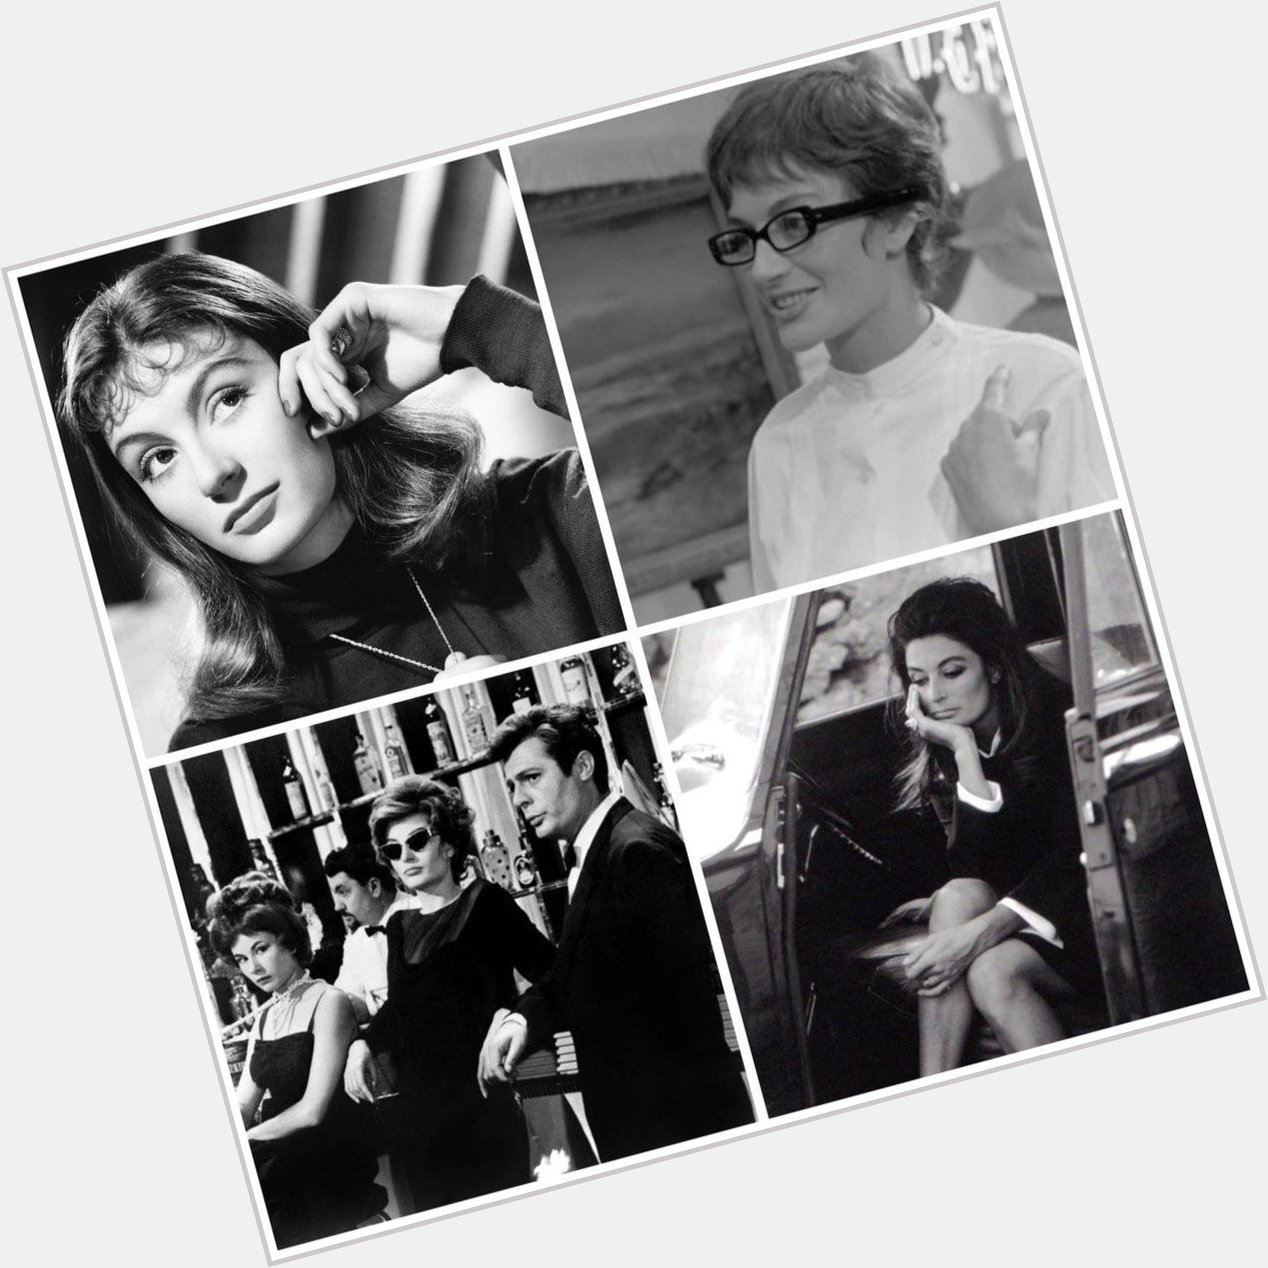 Happy birthday to the fascinating French actress Anouk Aimee.  